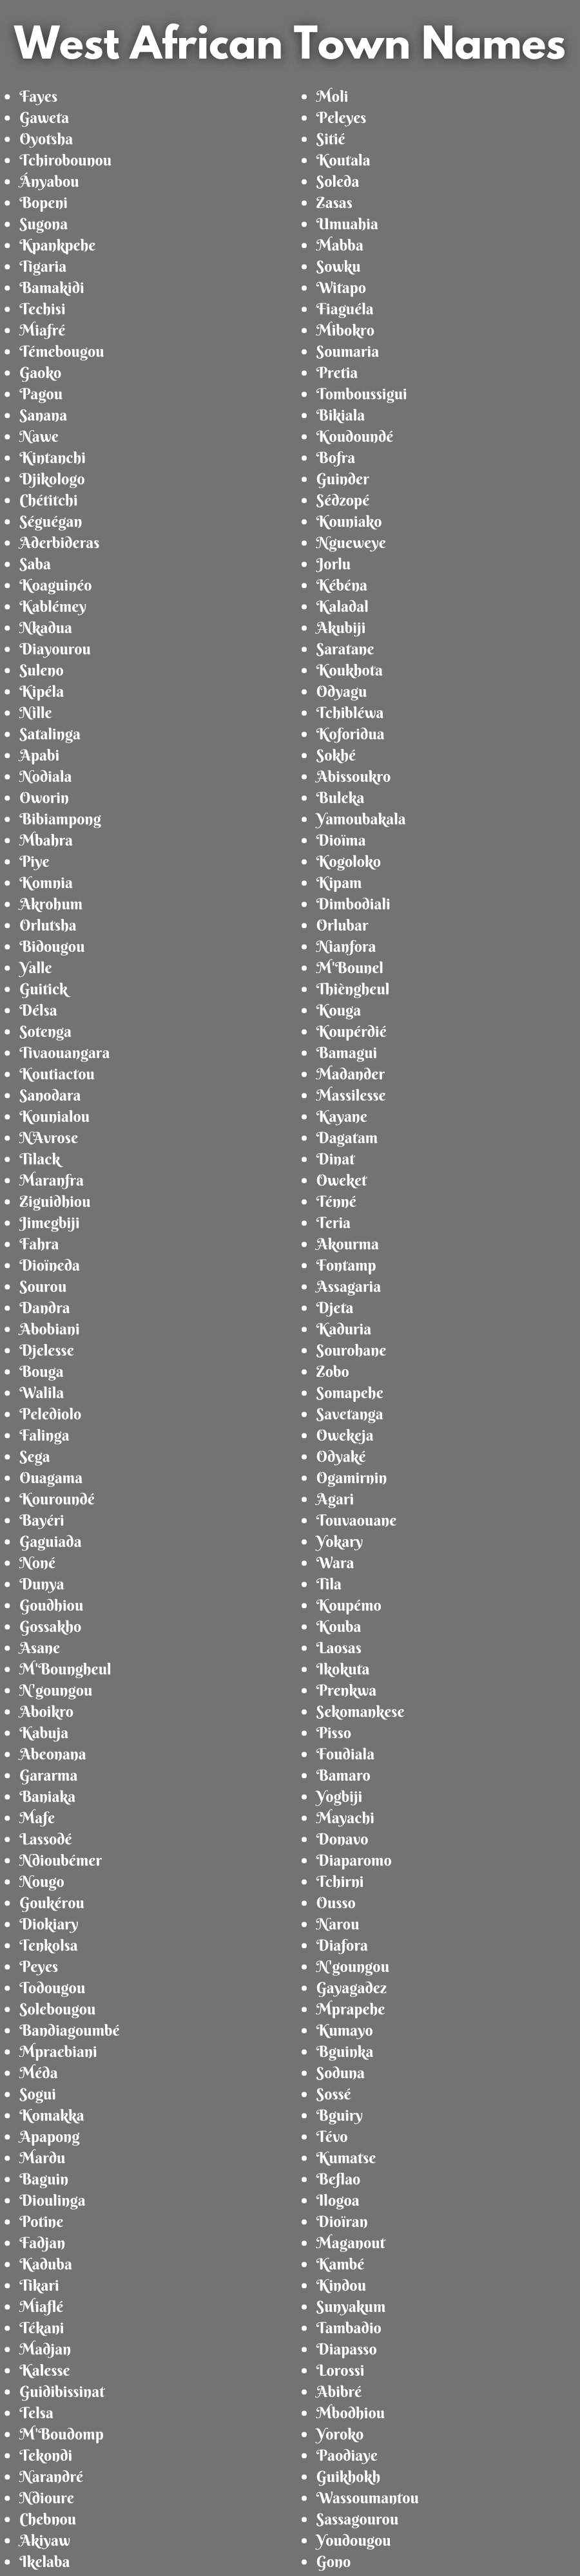 West African Town Names